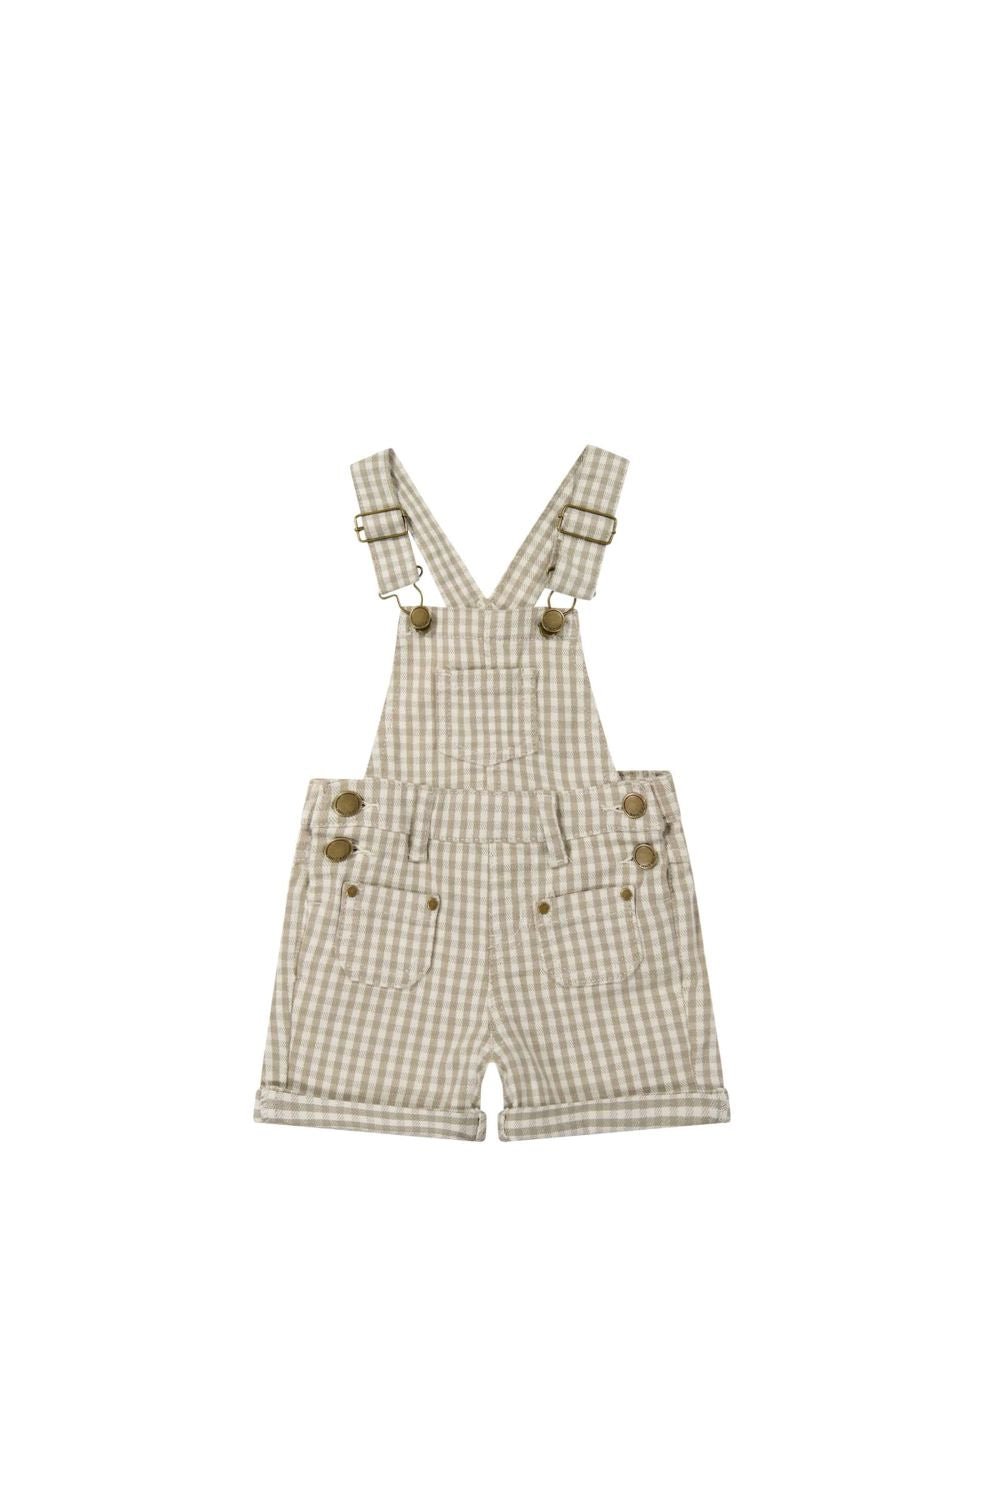 Jamie Kay - Chase Cotton Twill Short Overalls - Gingham